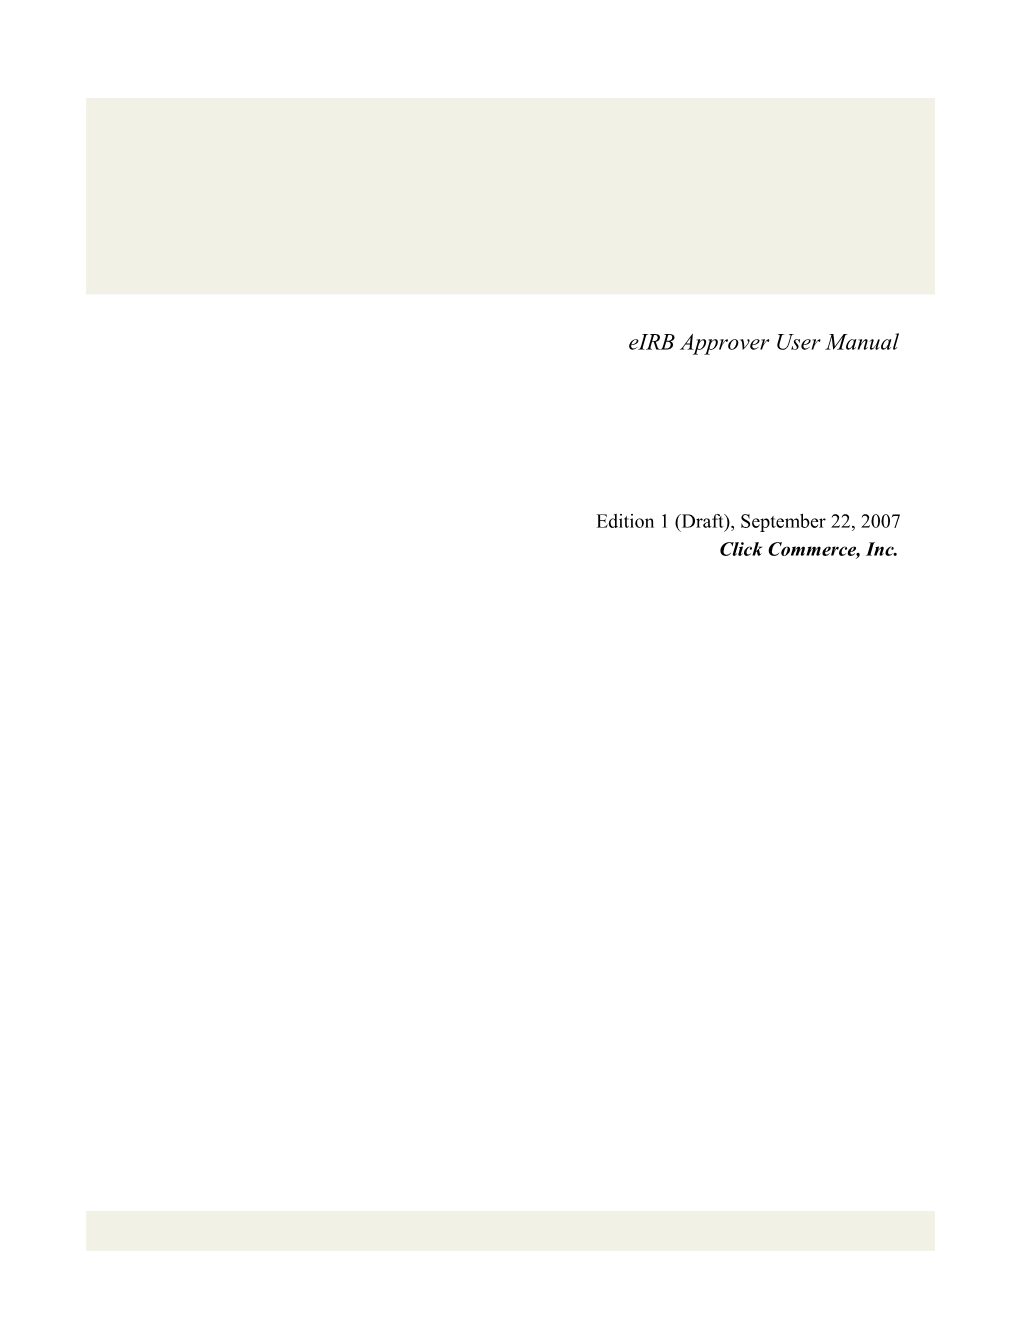 Eirb Approver User Manual